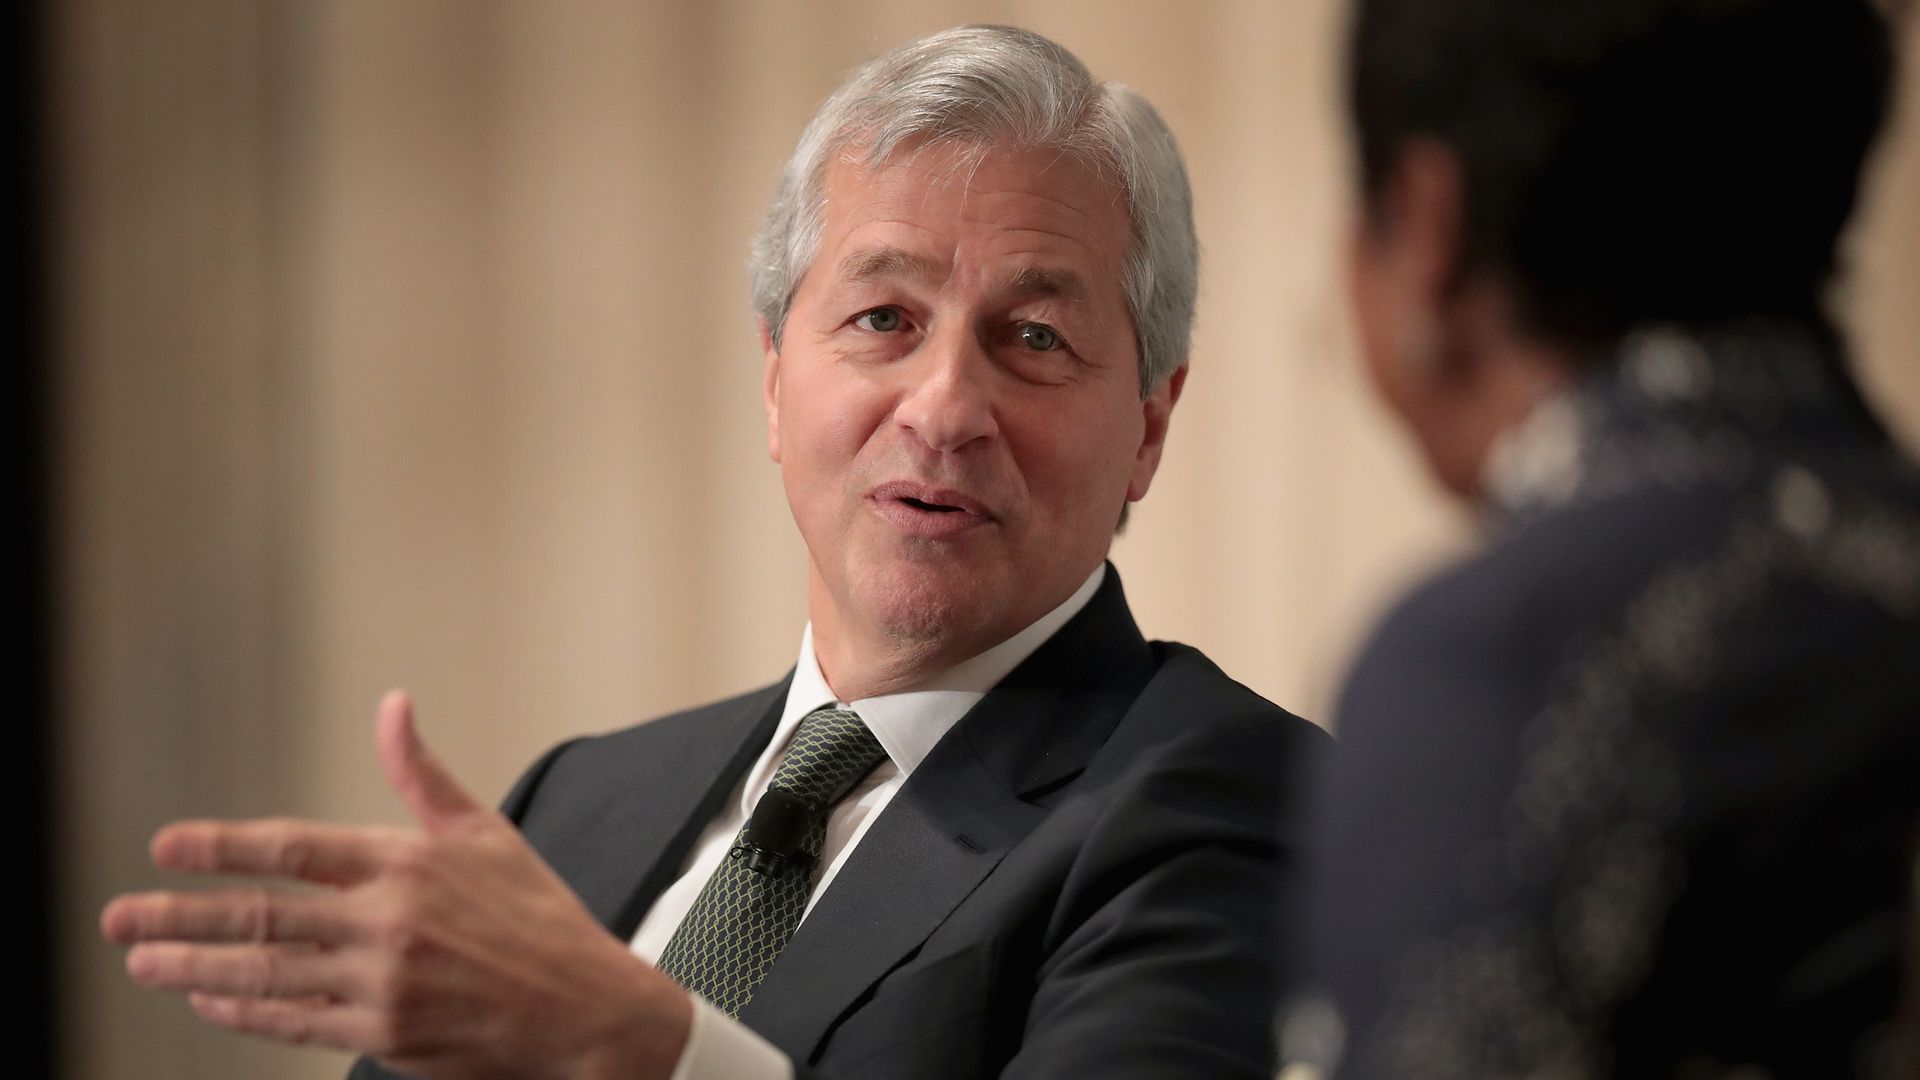 JPMorgan CEO Jamie Dimon speaks at a conference.